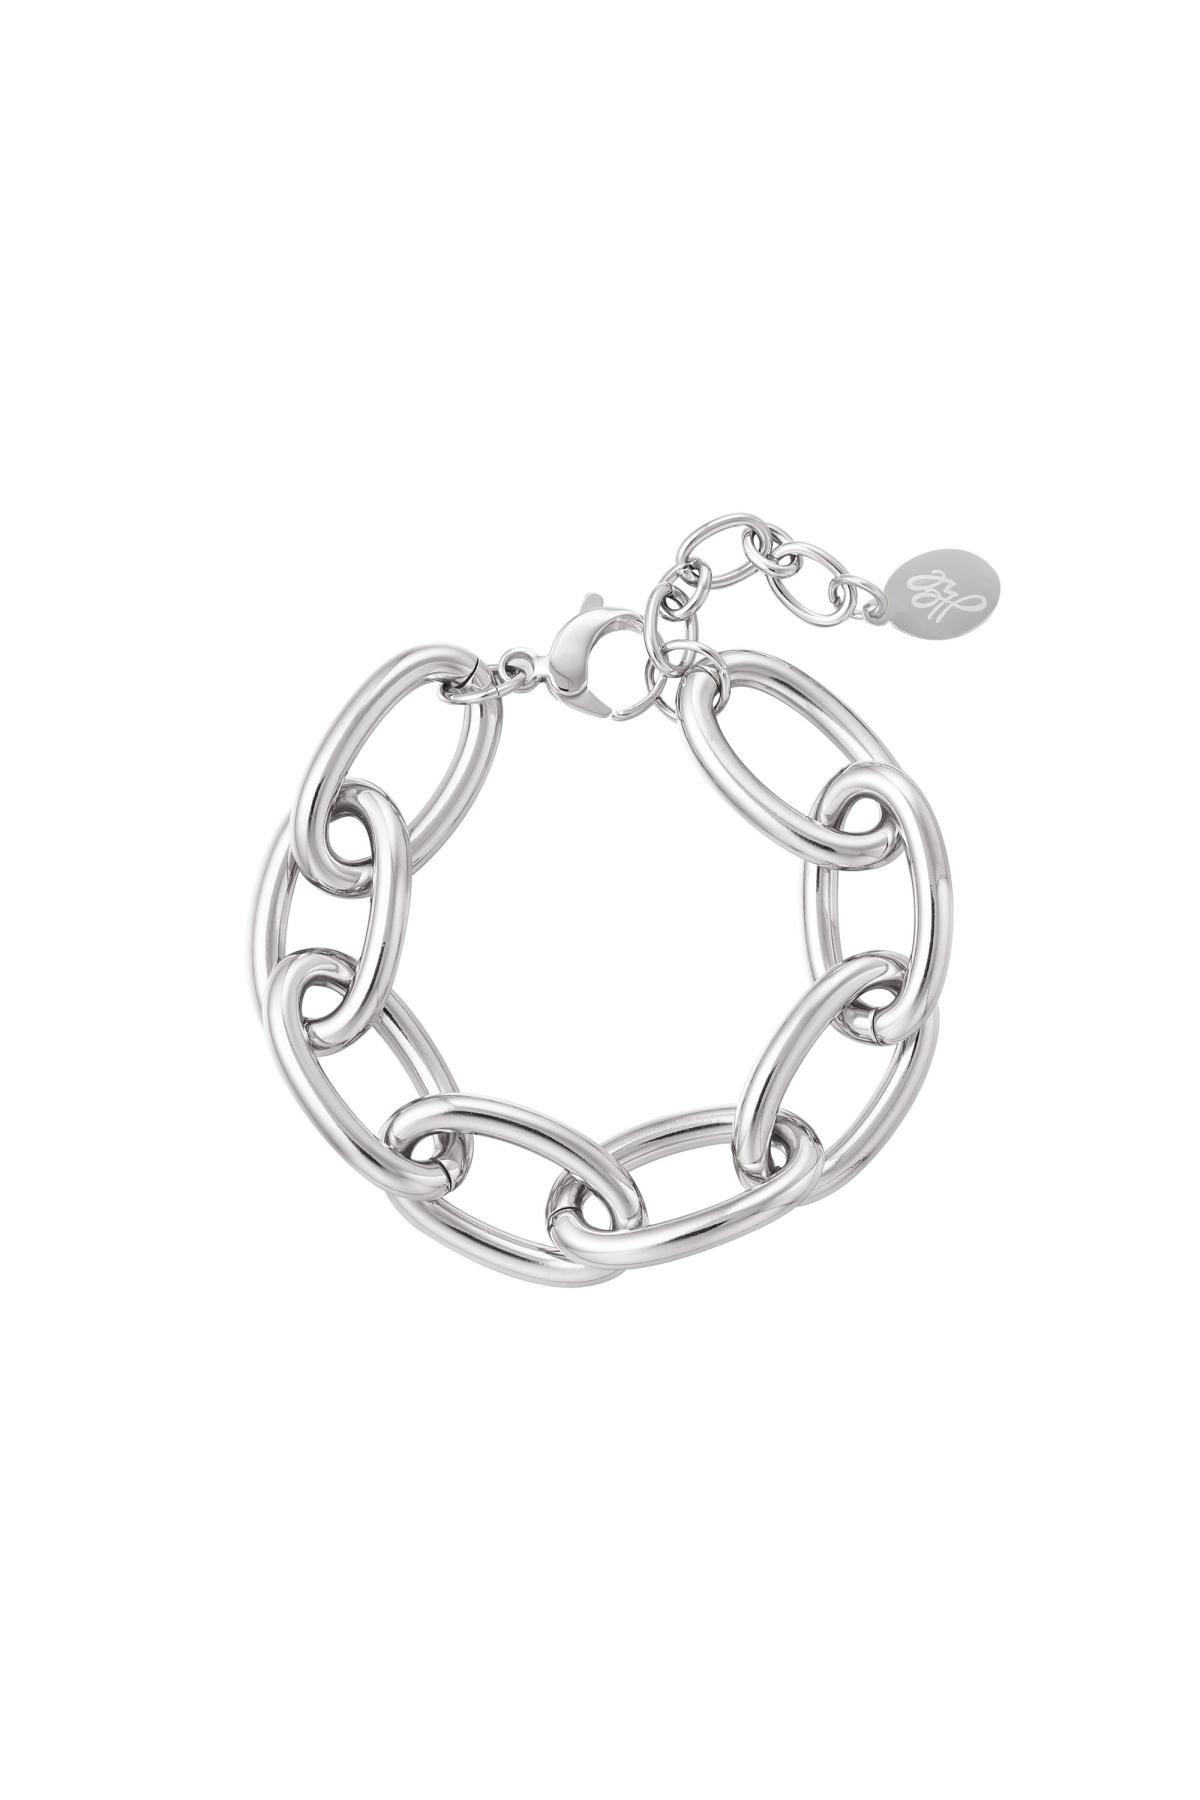 Chunky chain bracelet with large links Silver Stainless Steel